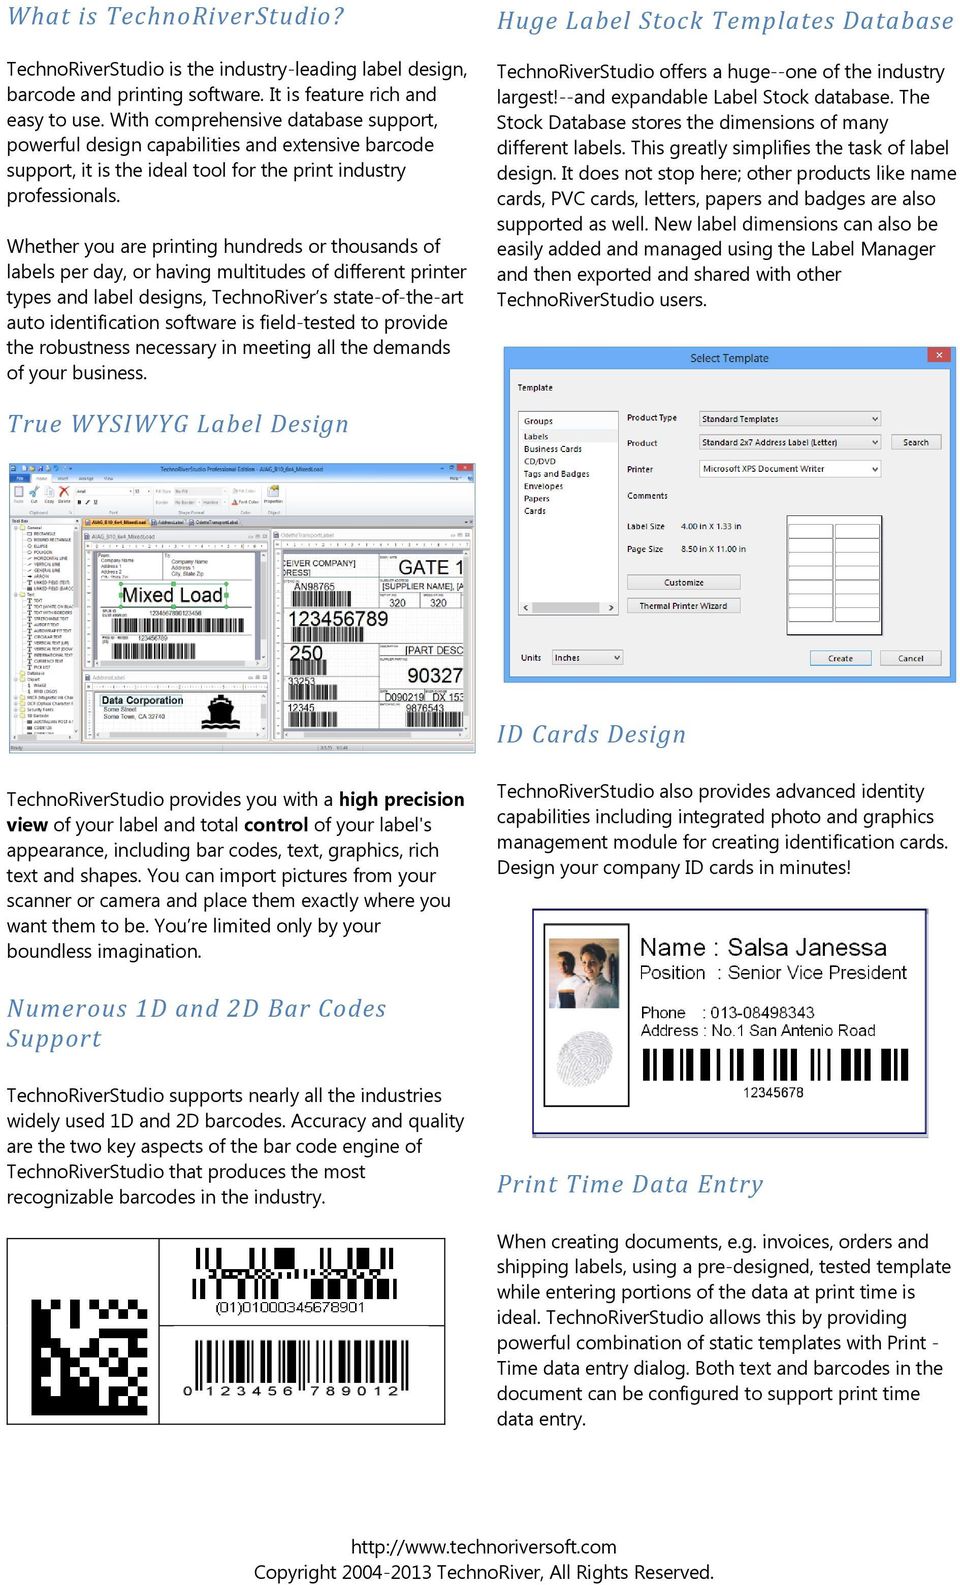 Whether you are printing hundreds or thousands of labels per day, or having multitudes of different printer types and label designs, TechnoRiver s state-of-the-art auto identification software is